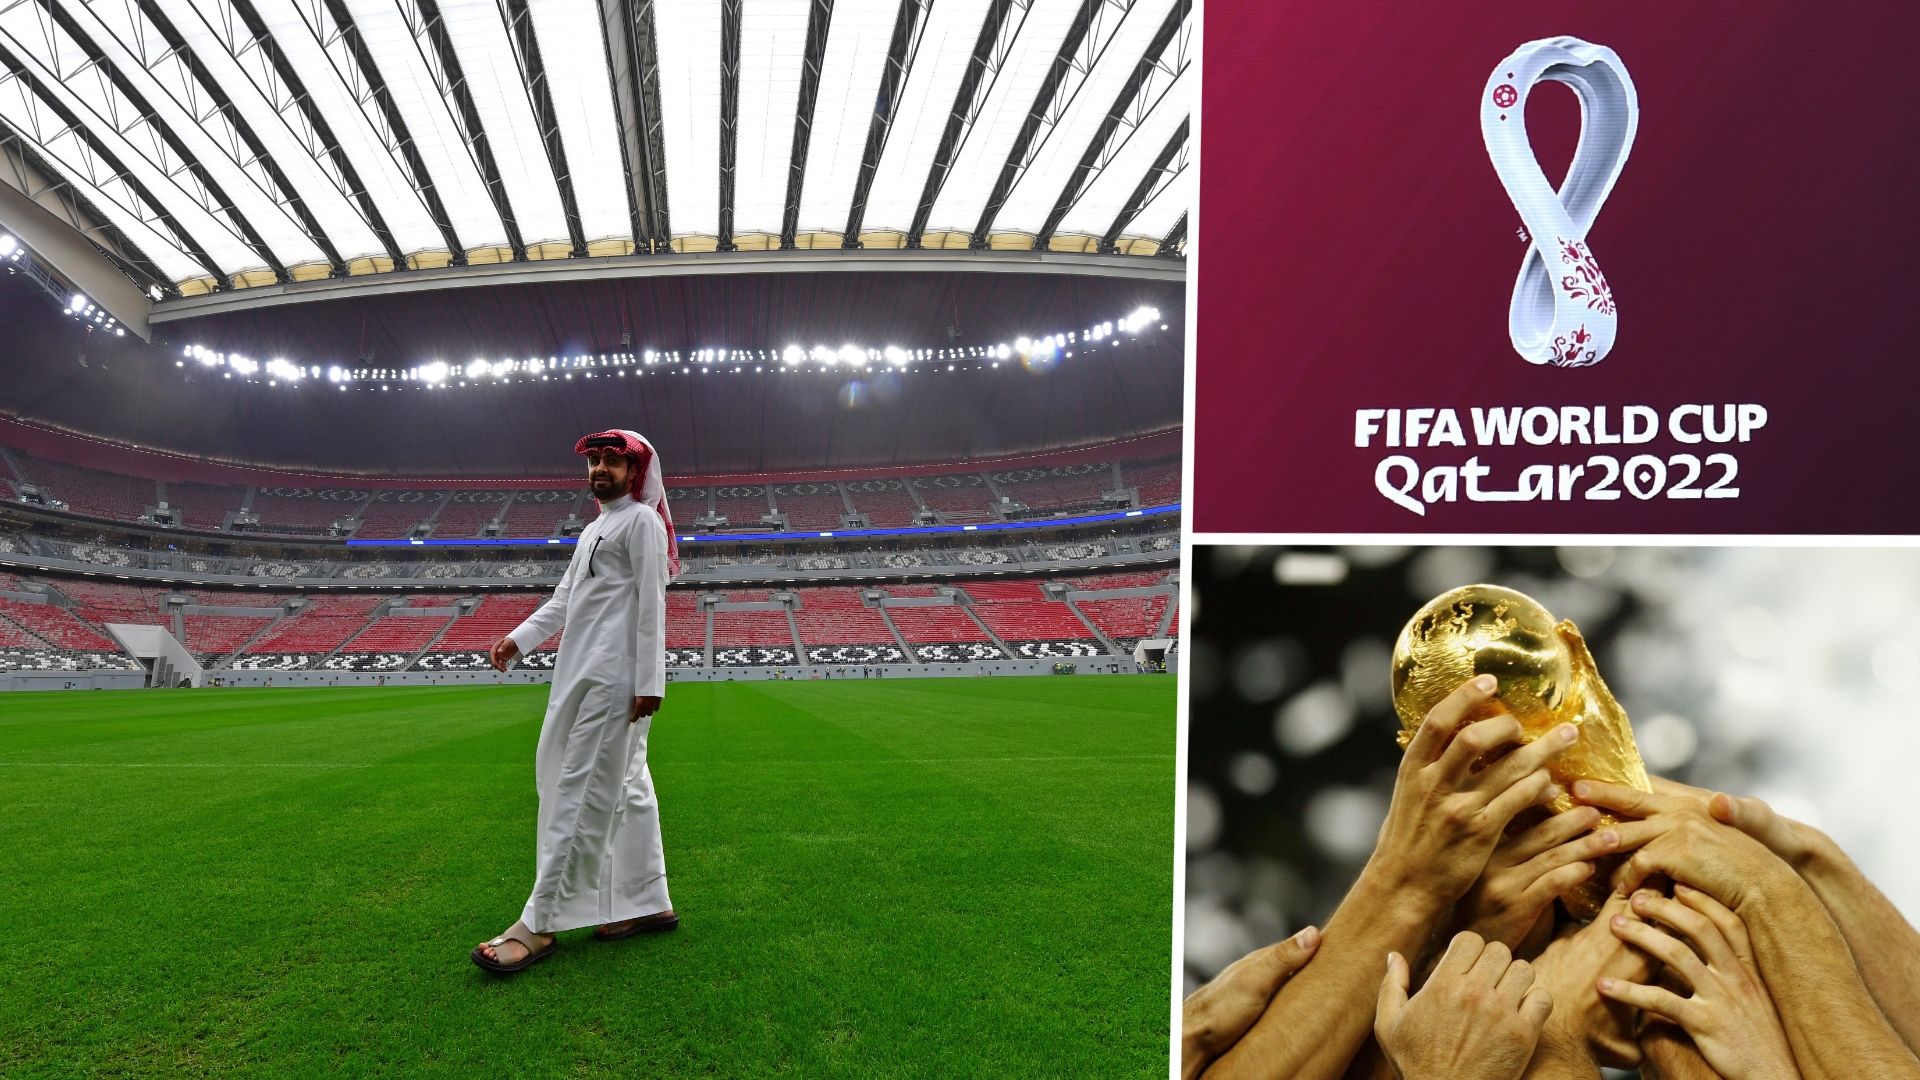 How will World Cup 2022 affect the Premier League & European